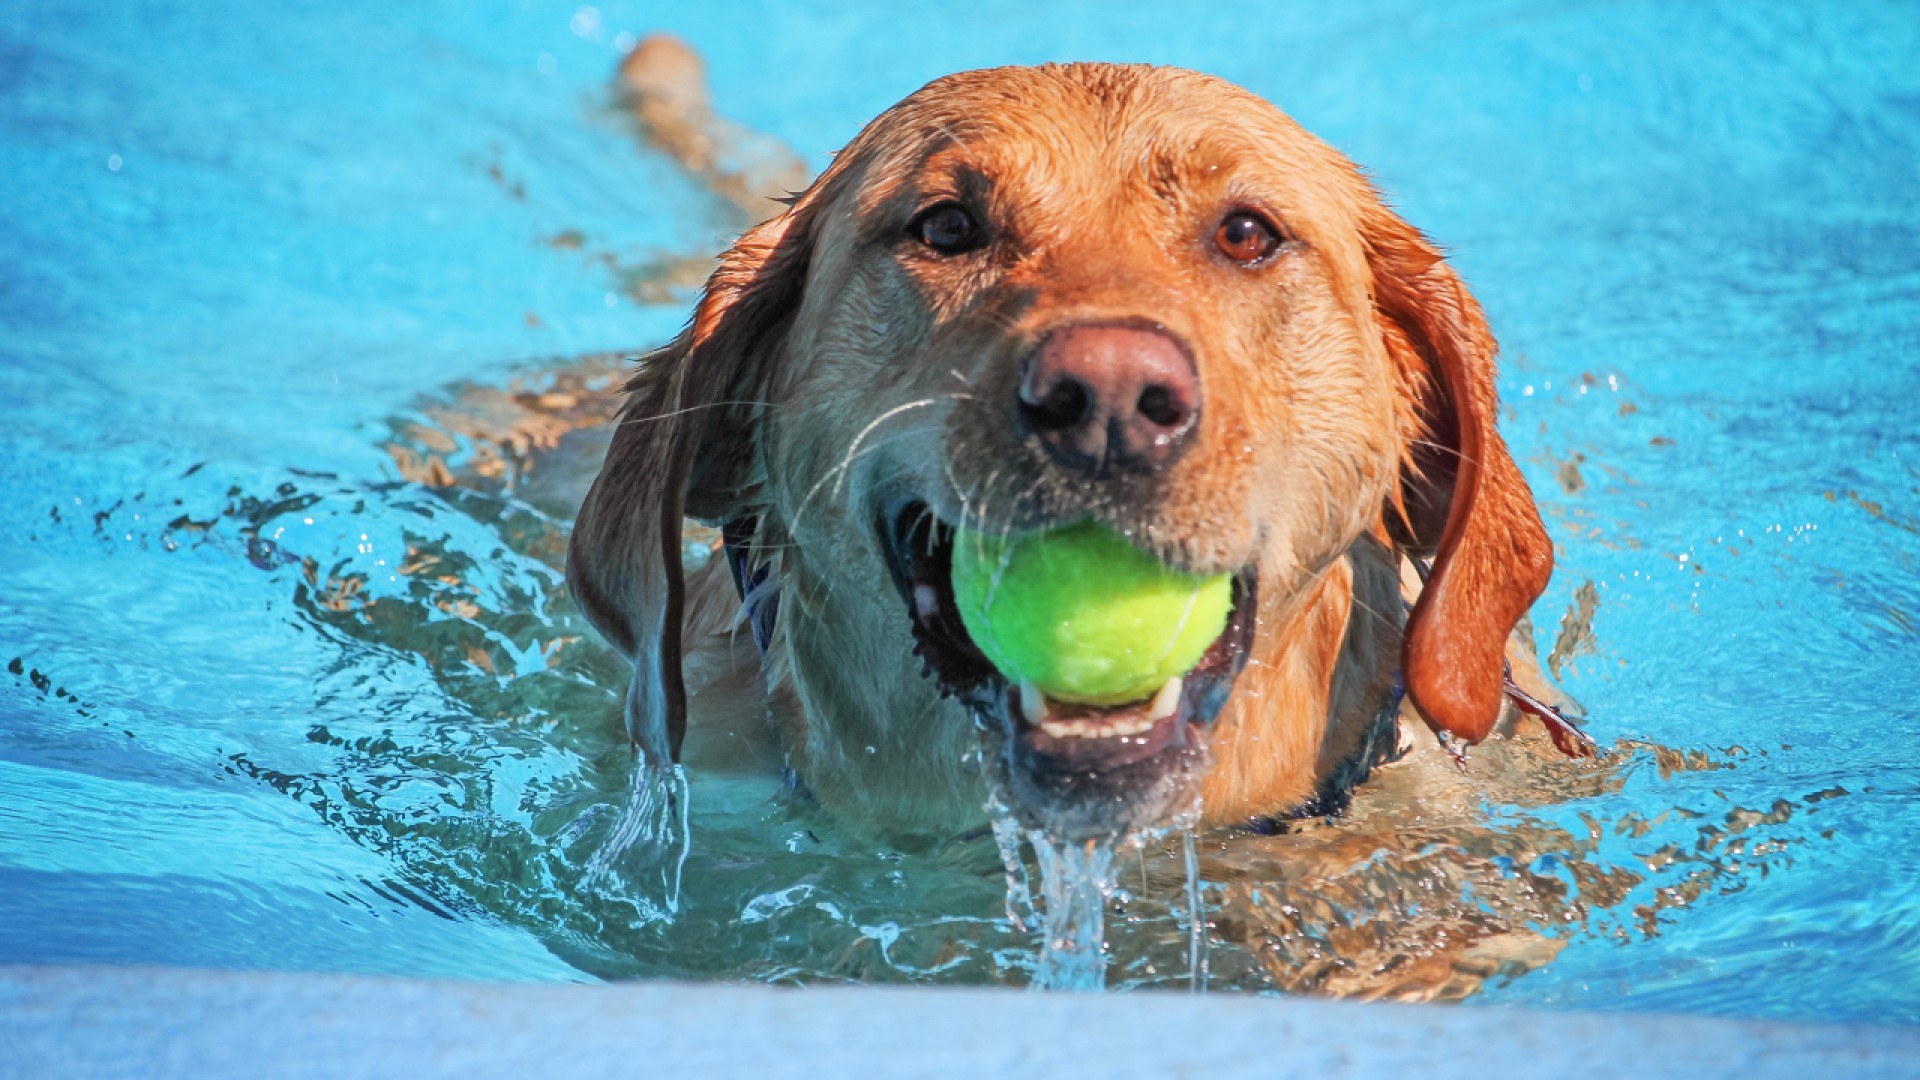 can dogs swim in public pools